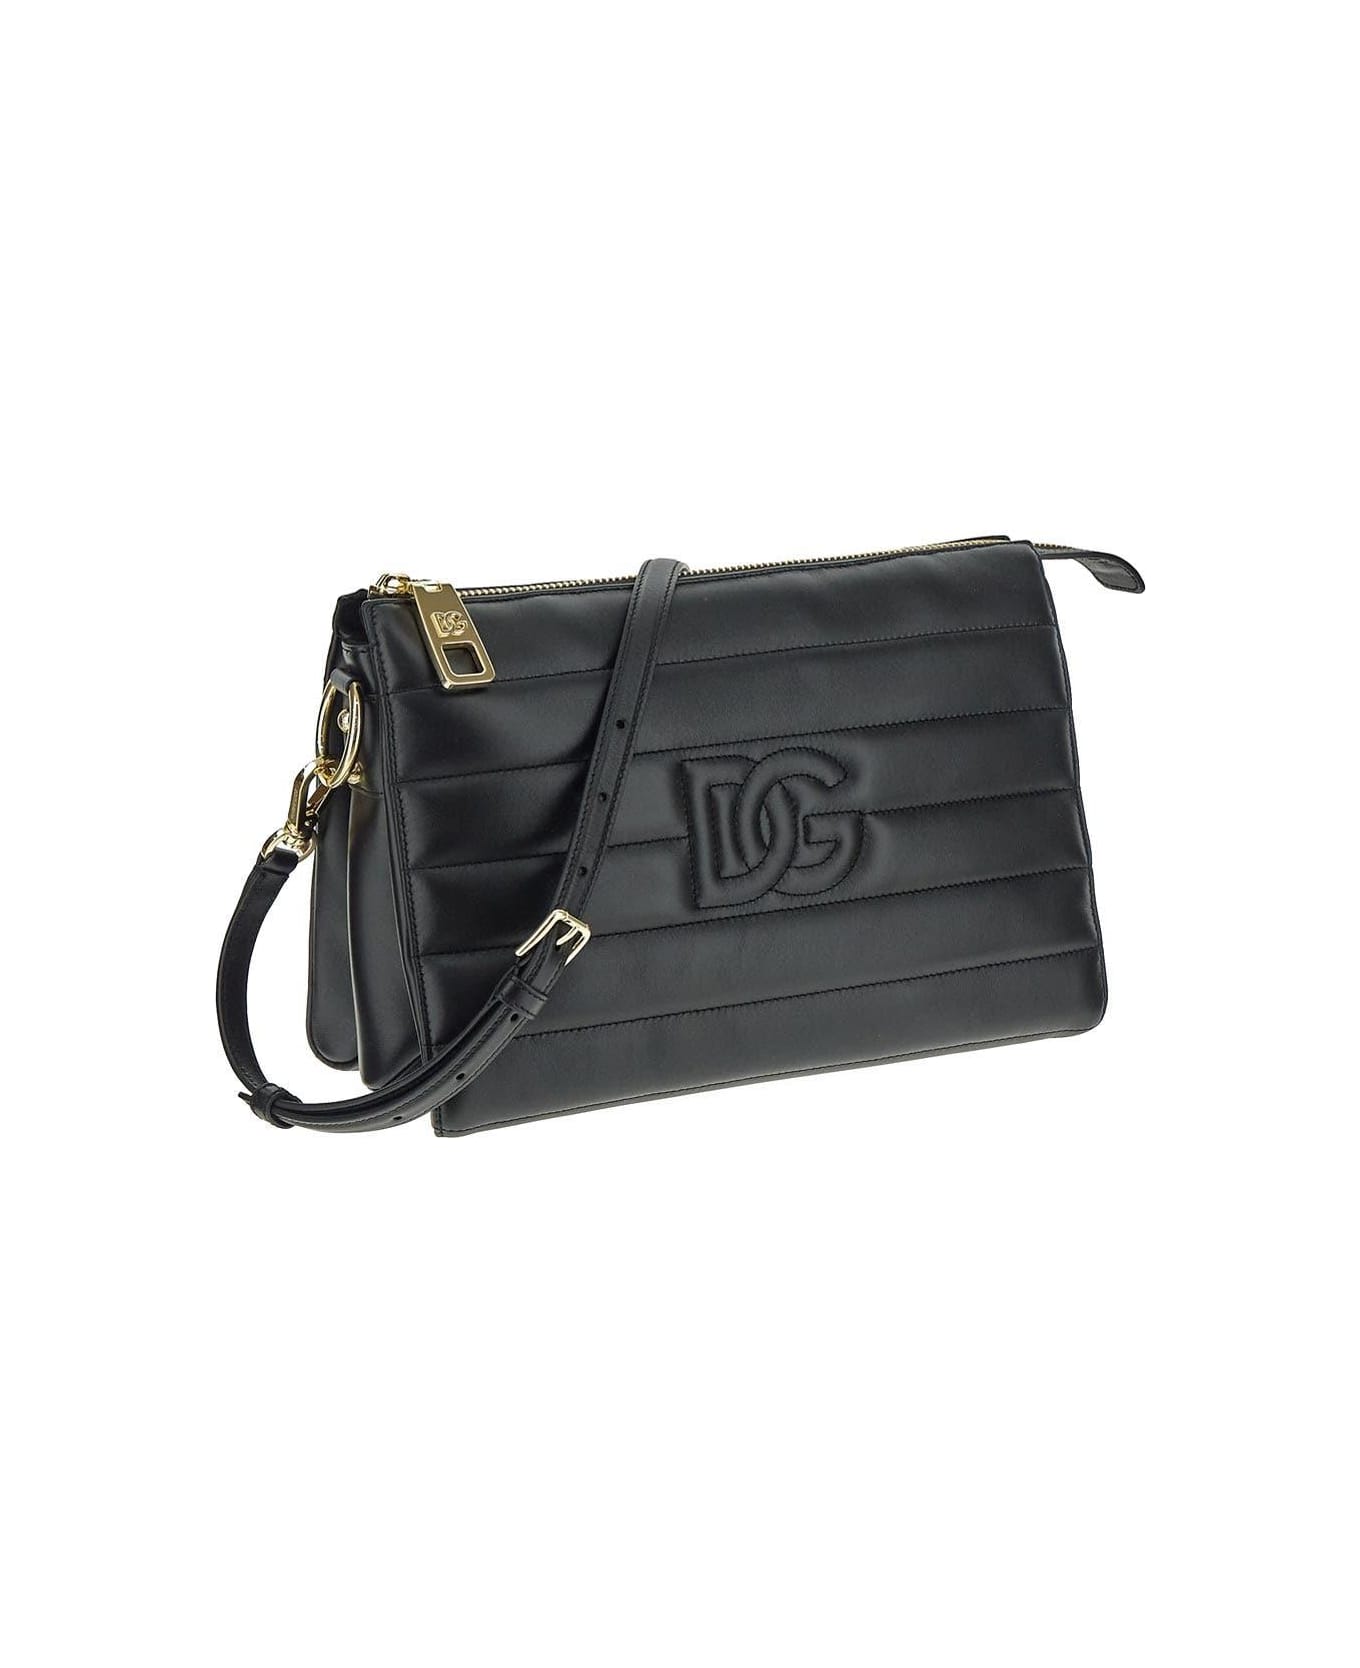 Dolce & Gabbana Quilted Bag - Nero